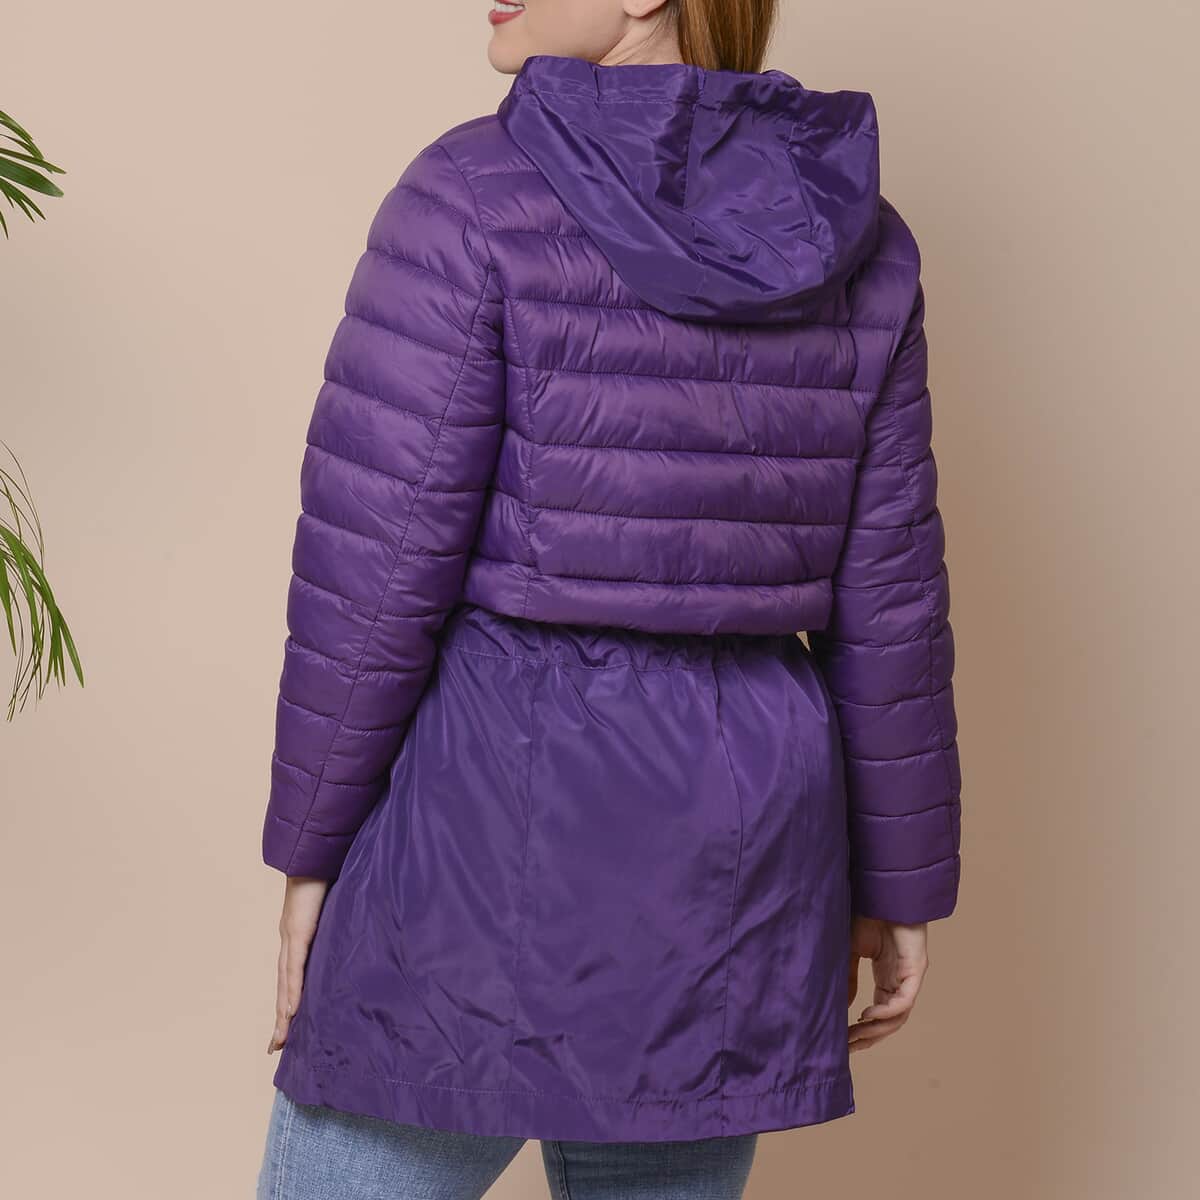 Passage Plum Purple Hooded Women's Coat with Sleeves - L image number 1